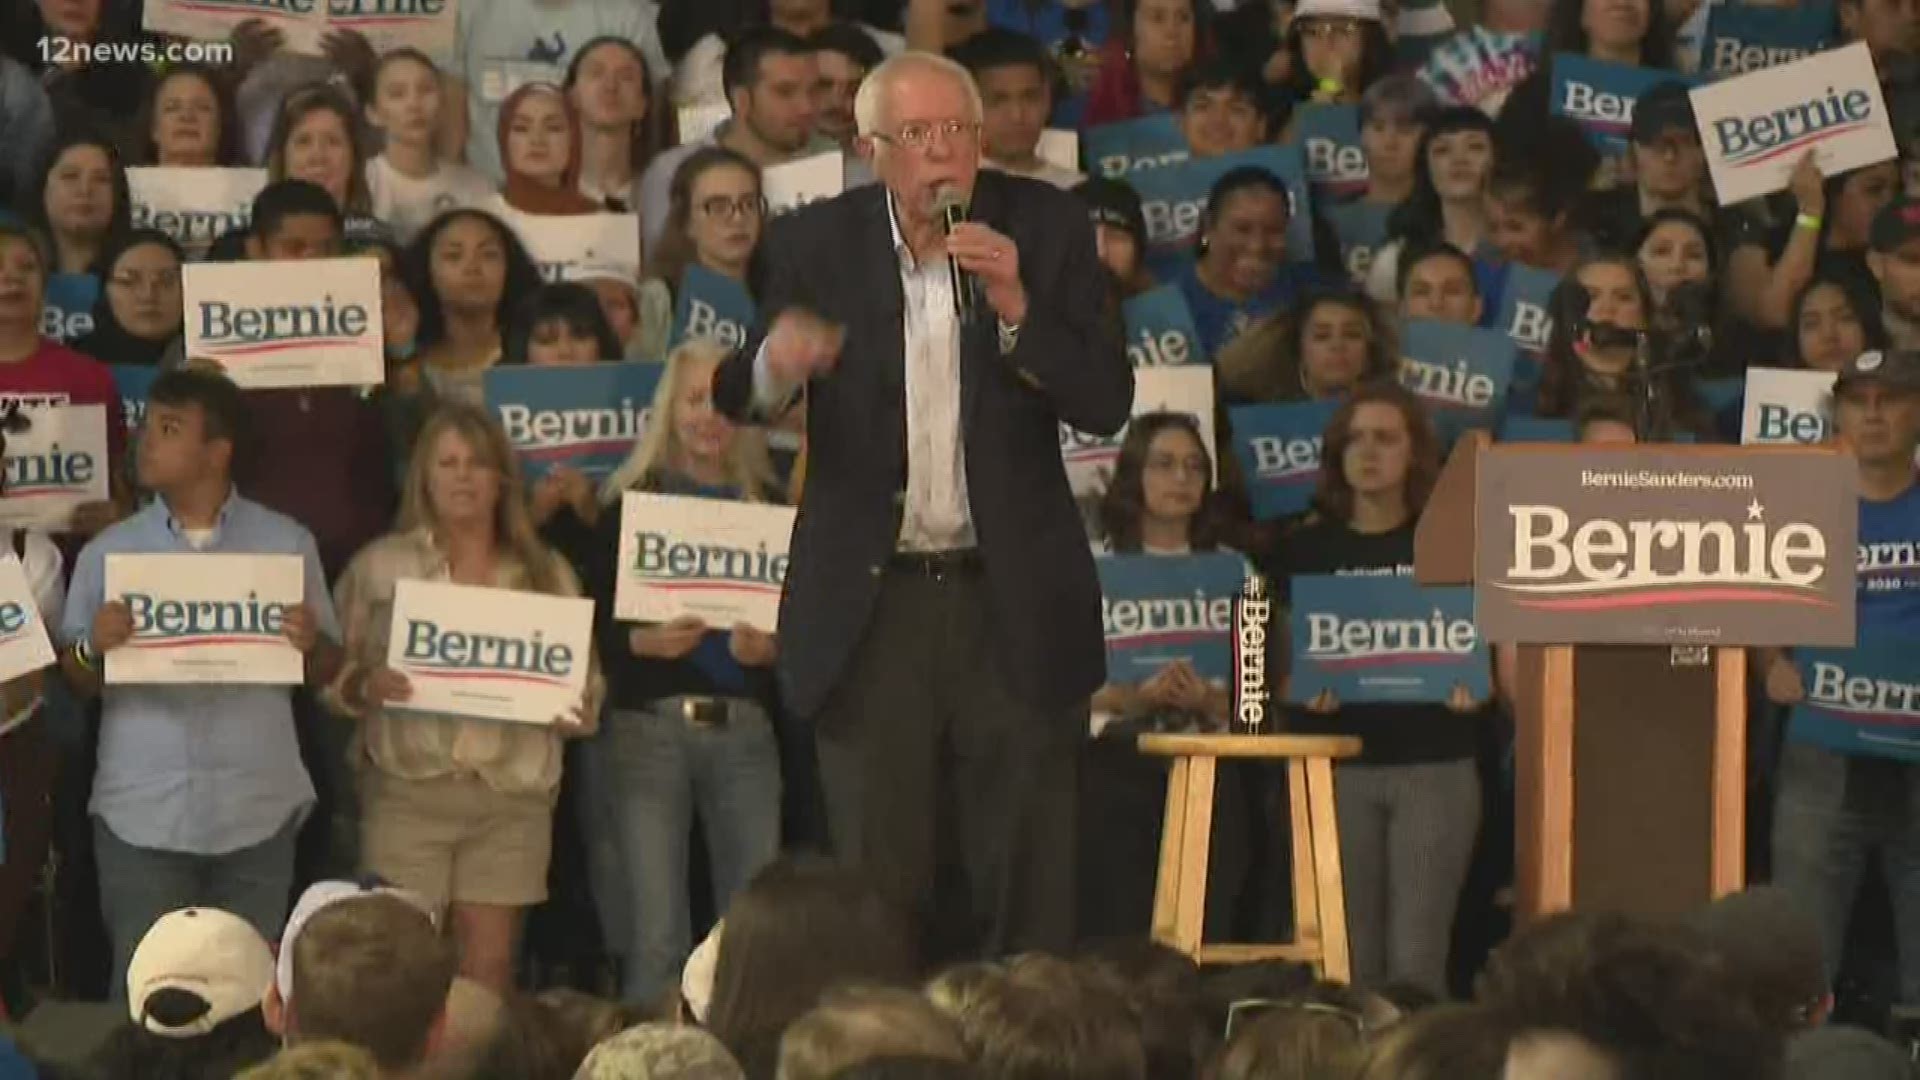 Bernie Sanders spoke at a Phoenix rally Thursday night. He addressed his supporters at Arizona Veterans Memorial Coliseum.